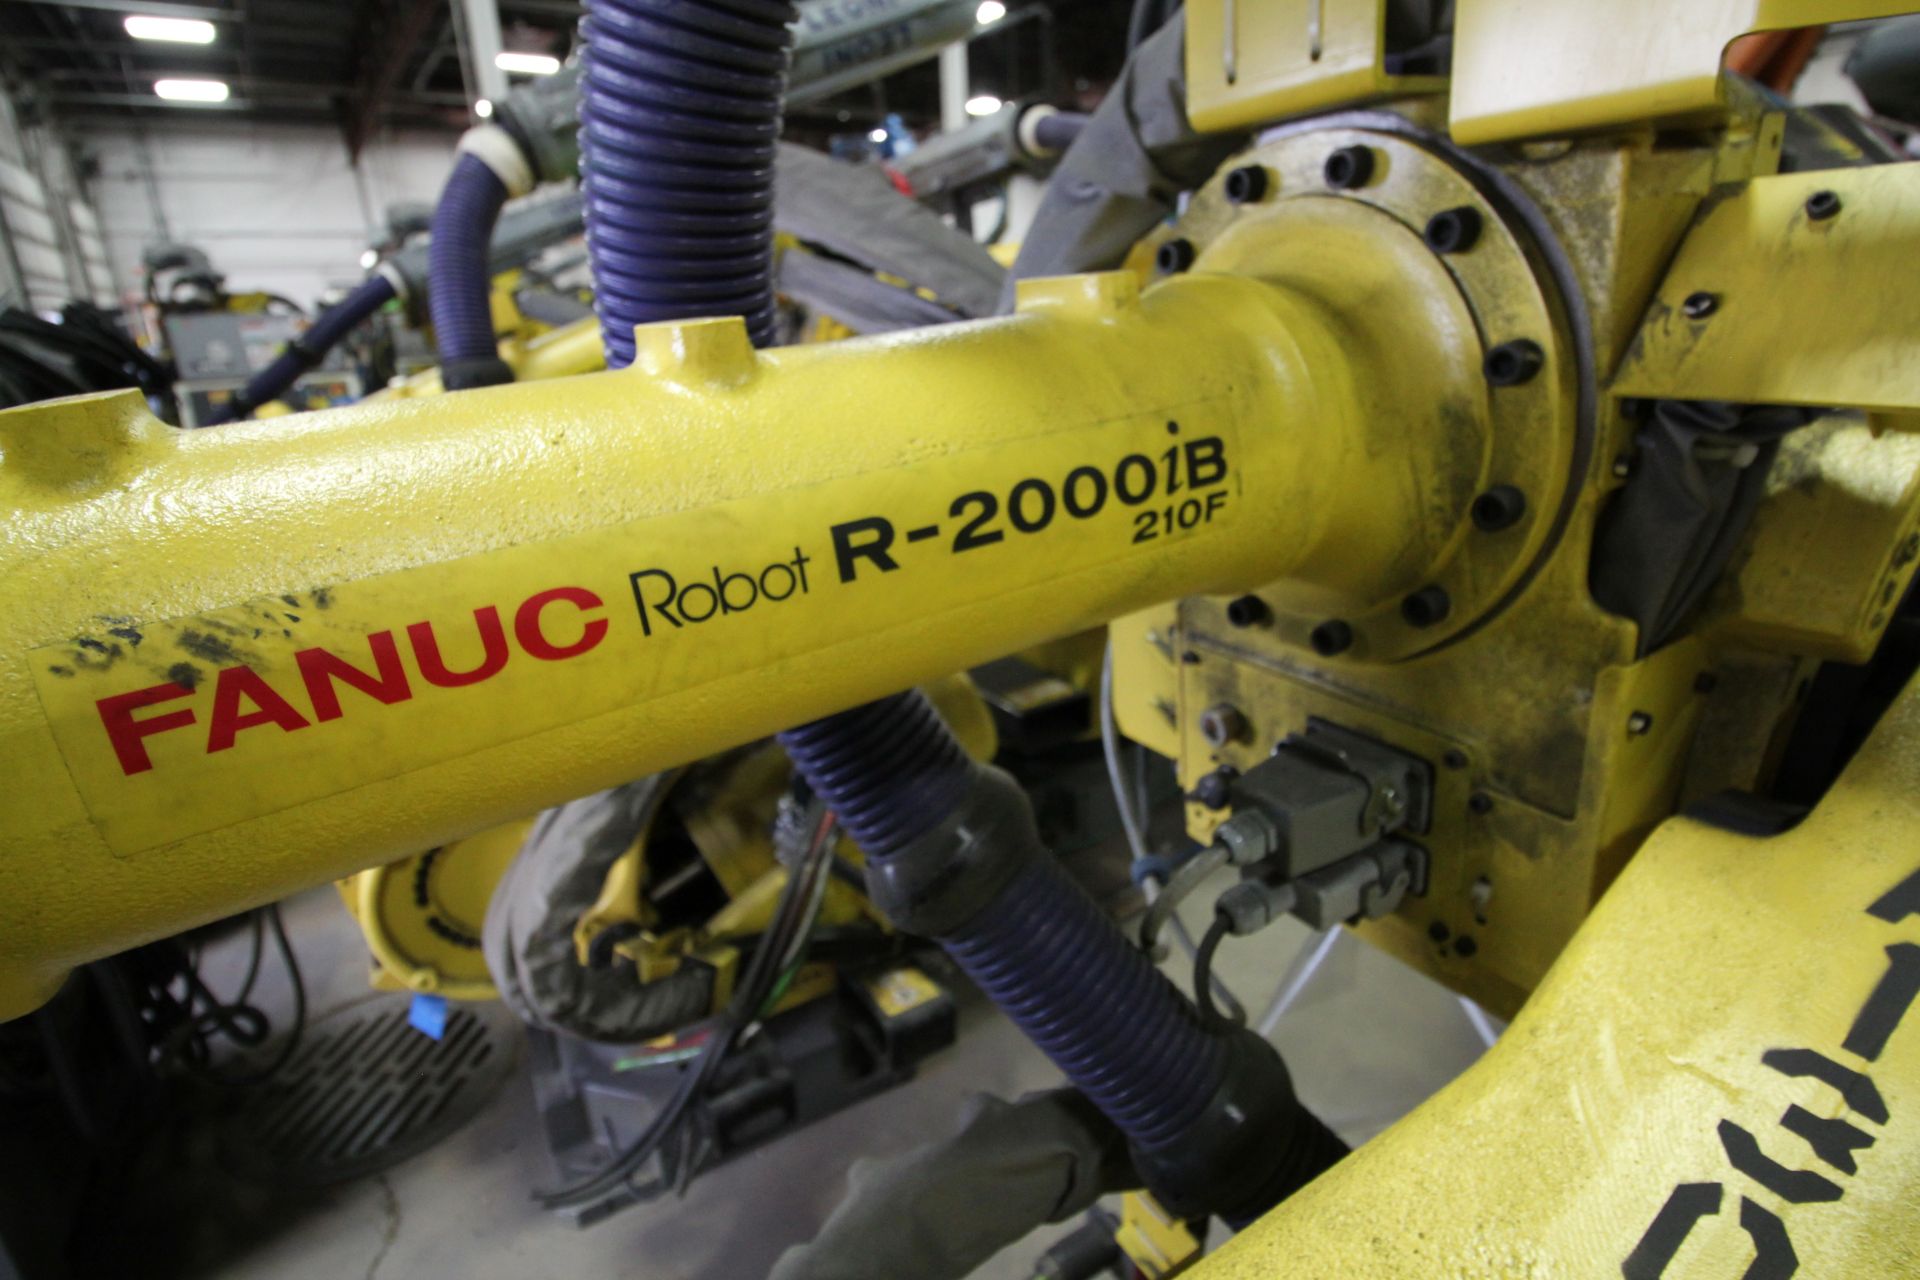 FANUC ROBOT R-2000iB/210F WITH R-30iA CONTROL, CABLES & TEACH PENDANT, SN 148411, YEAR 2014 - Image 2 of 8